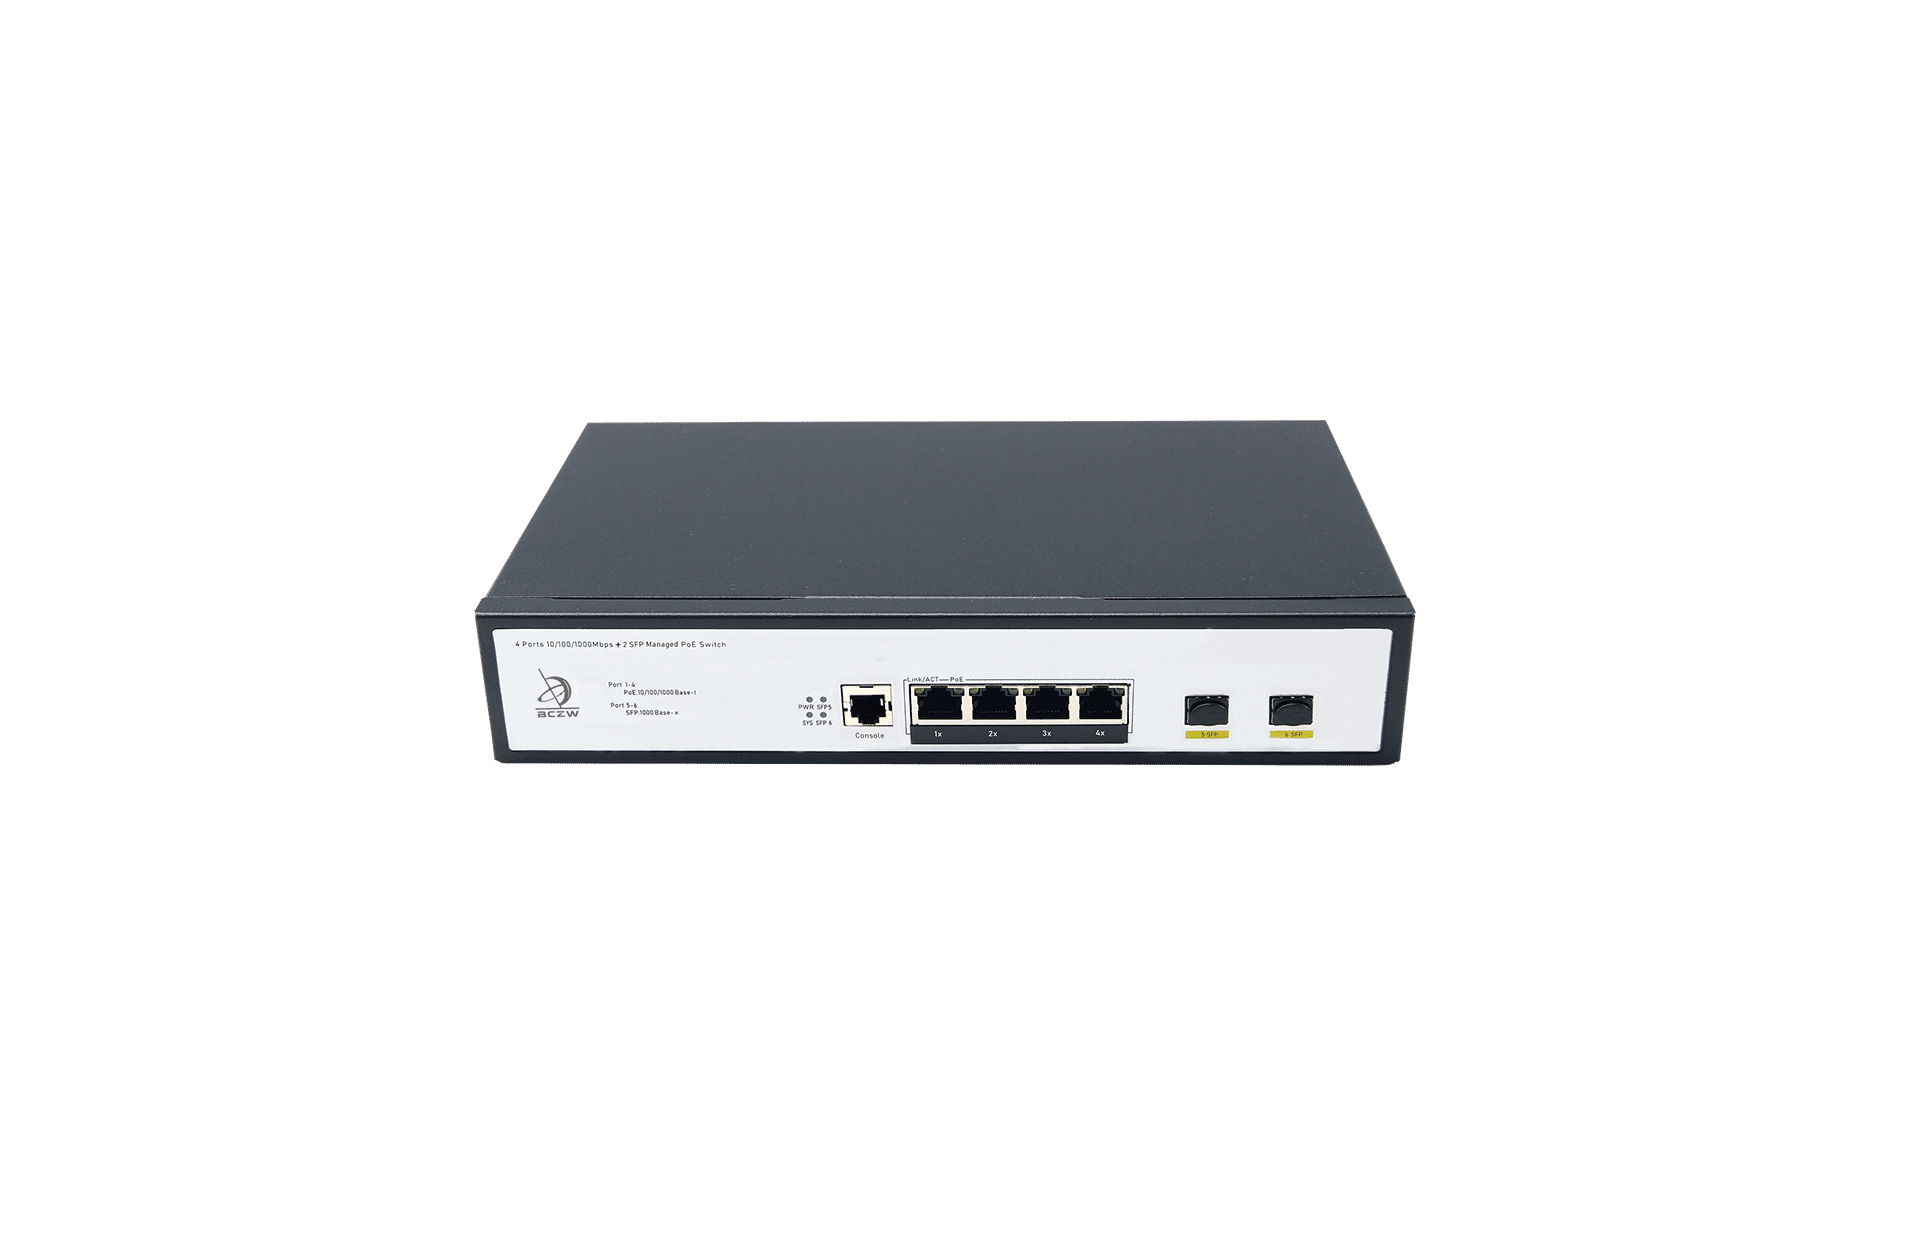 4 Ports 10/100/1000Mbps Managed PoE Switch with 2 Gigabit SFP